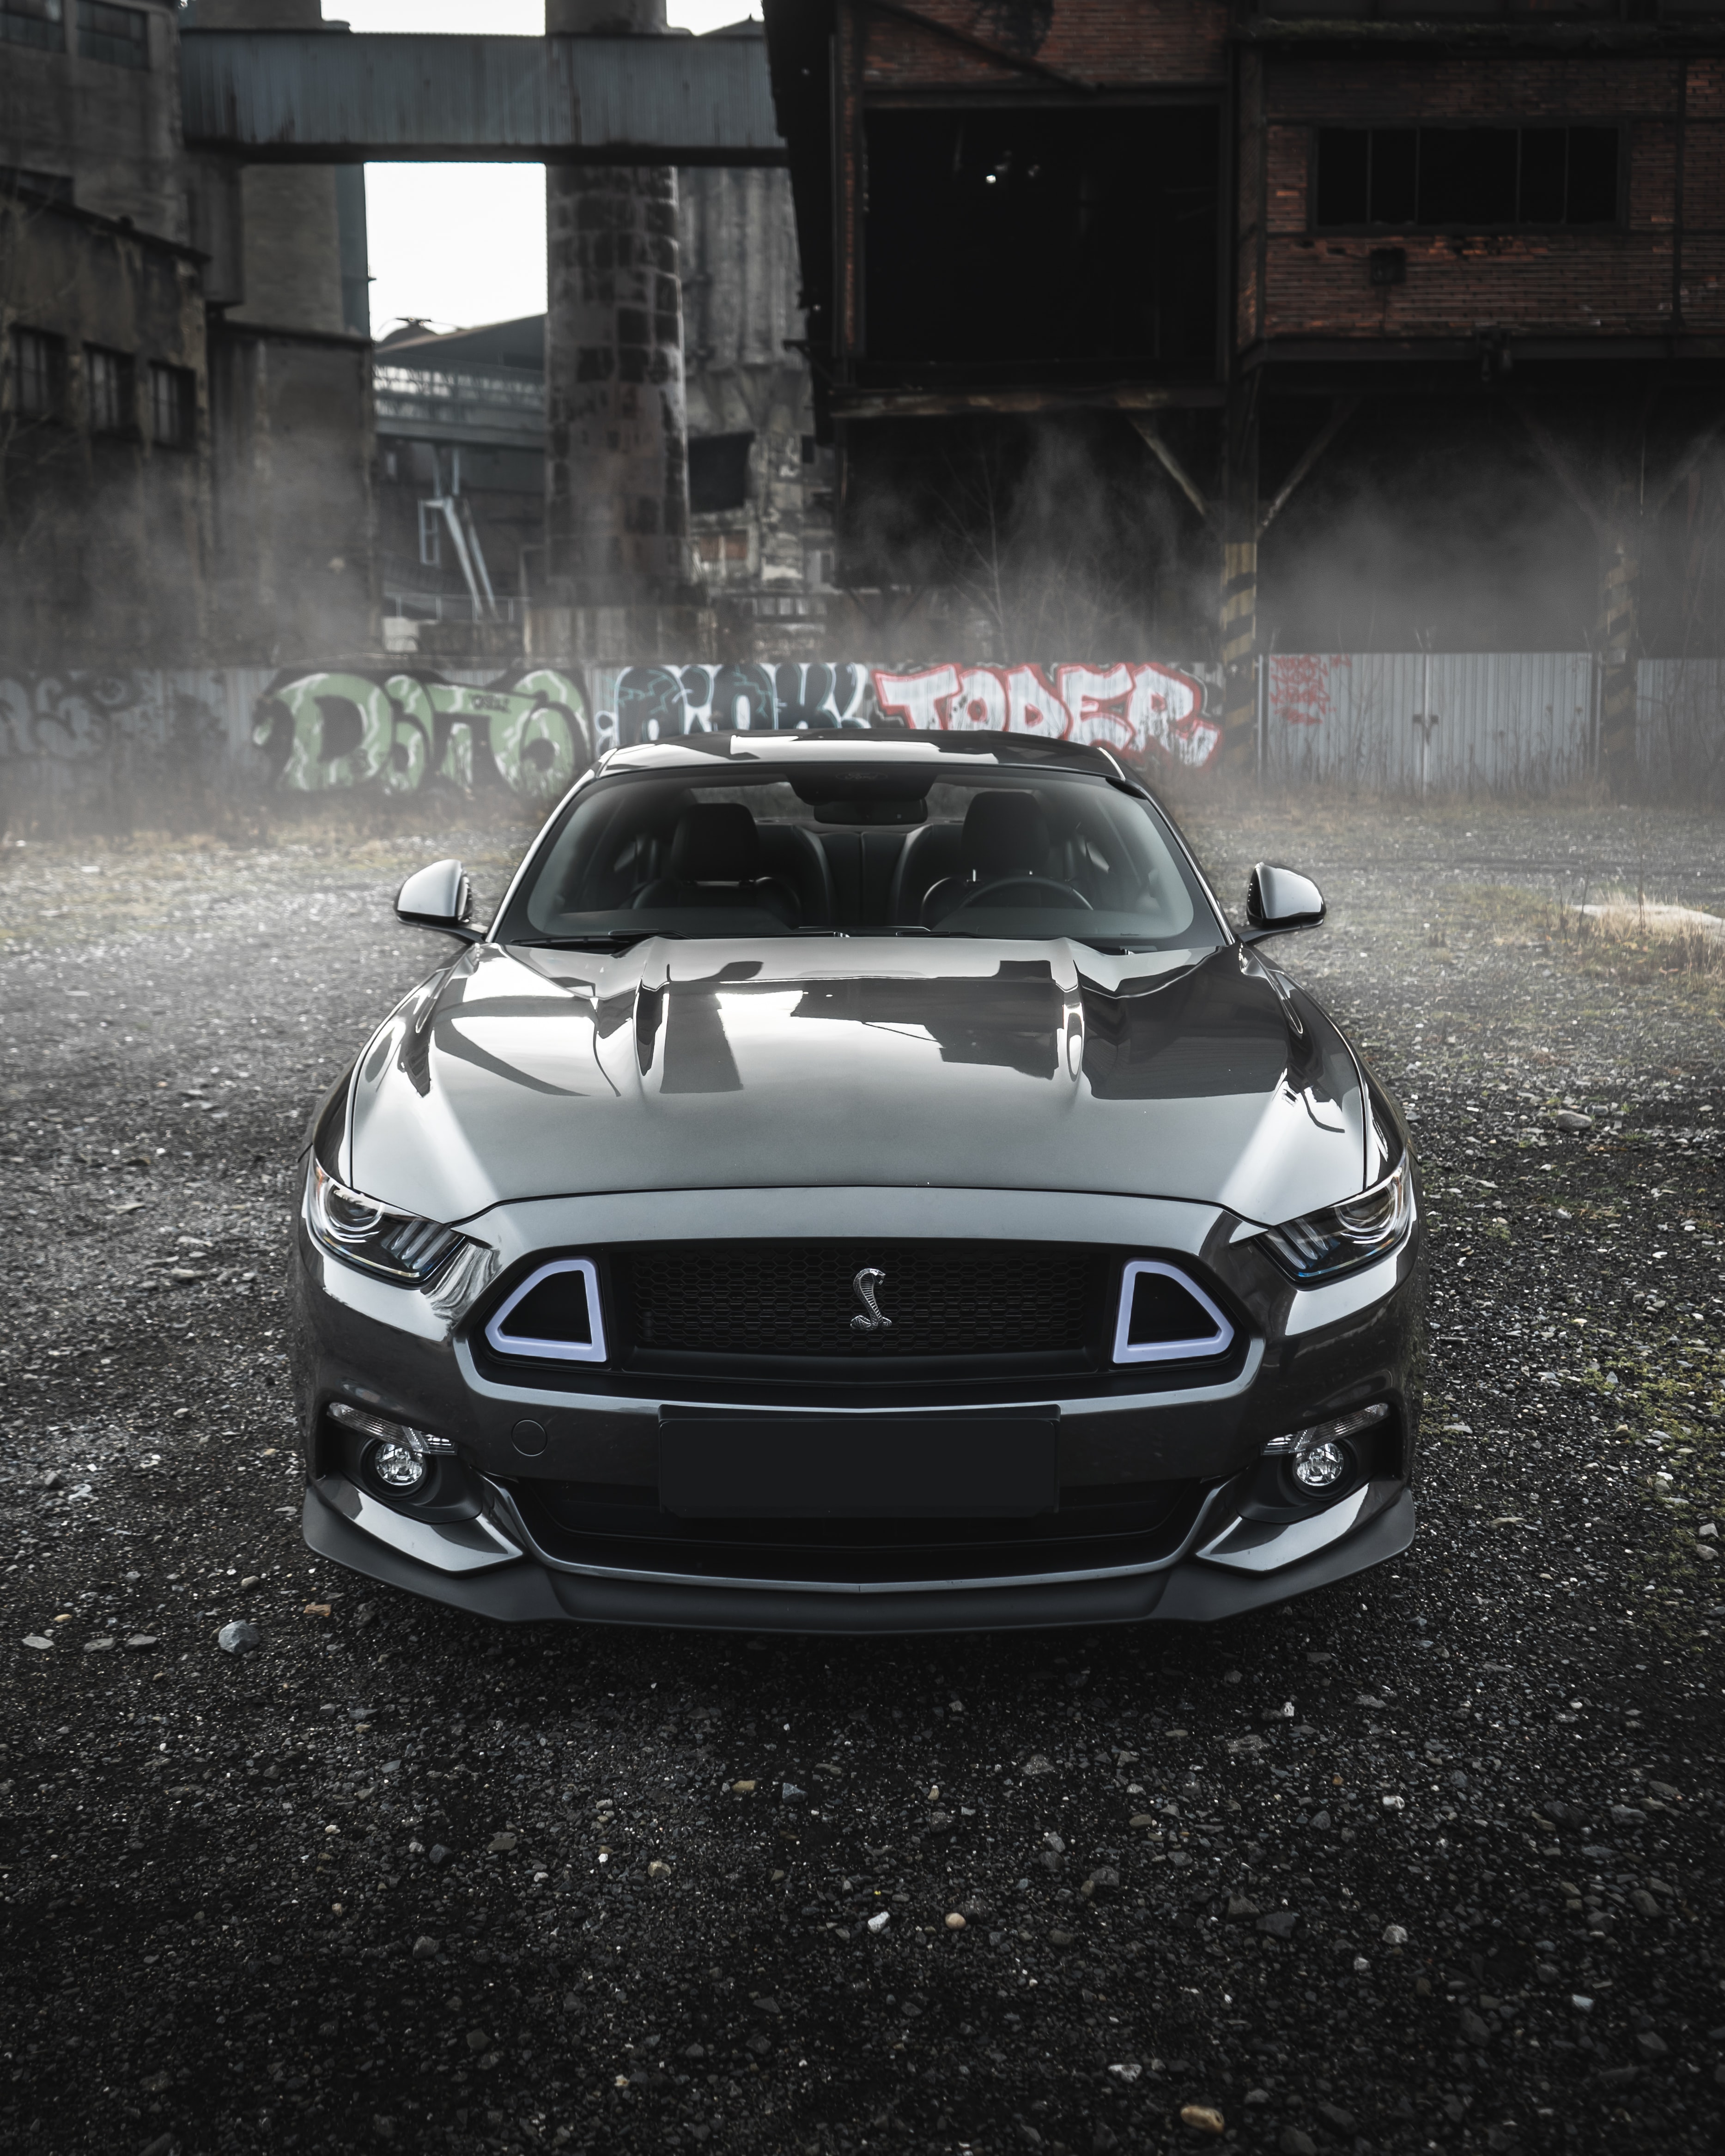 Download wallpaper 750x1334 mustang ford silver muscle car iphone 7  iphone 8 750x1334 hd background 20623